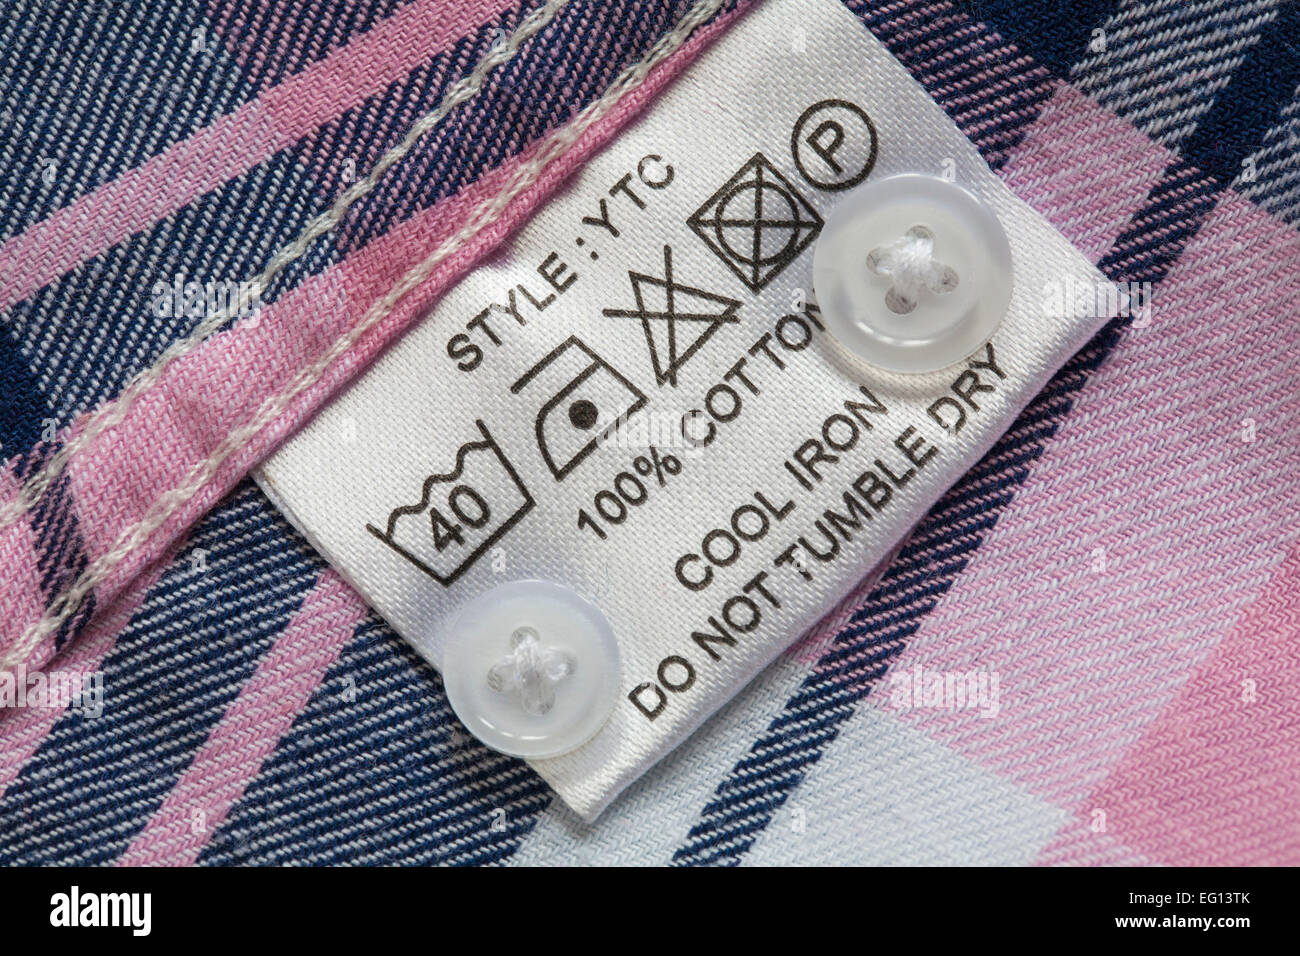 label showing washing instructions in 100% cotton check shirt with ...